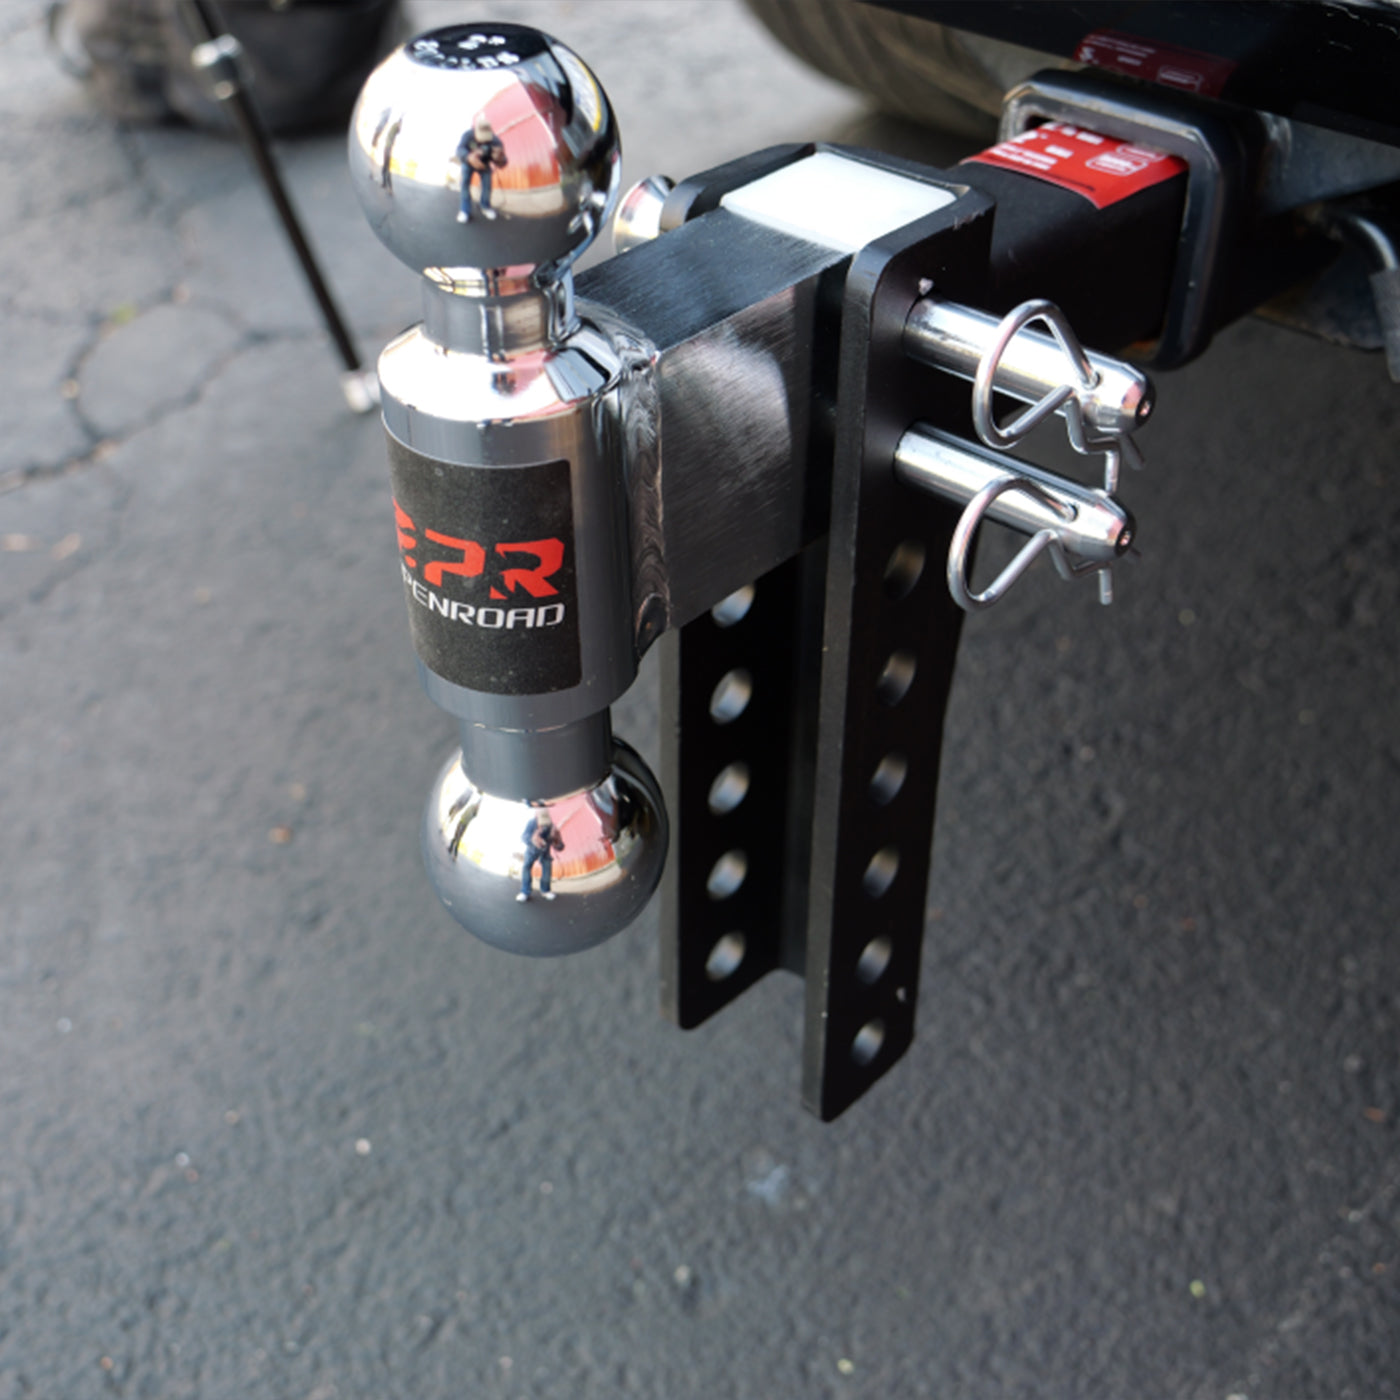 OPENROAD  10'' Adjustable Trailer Hitch for 2" Receiver  openroad4wd.com   